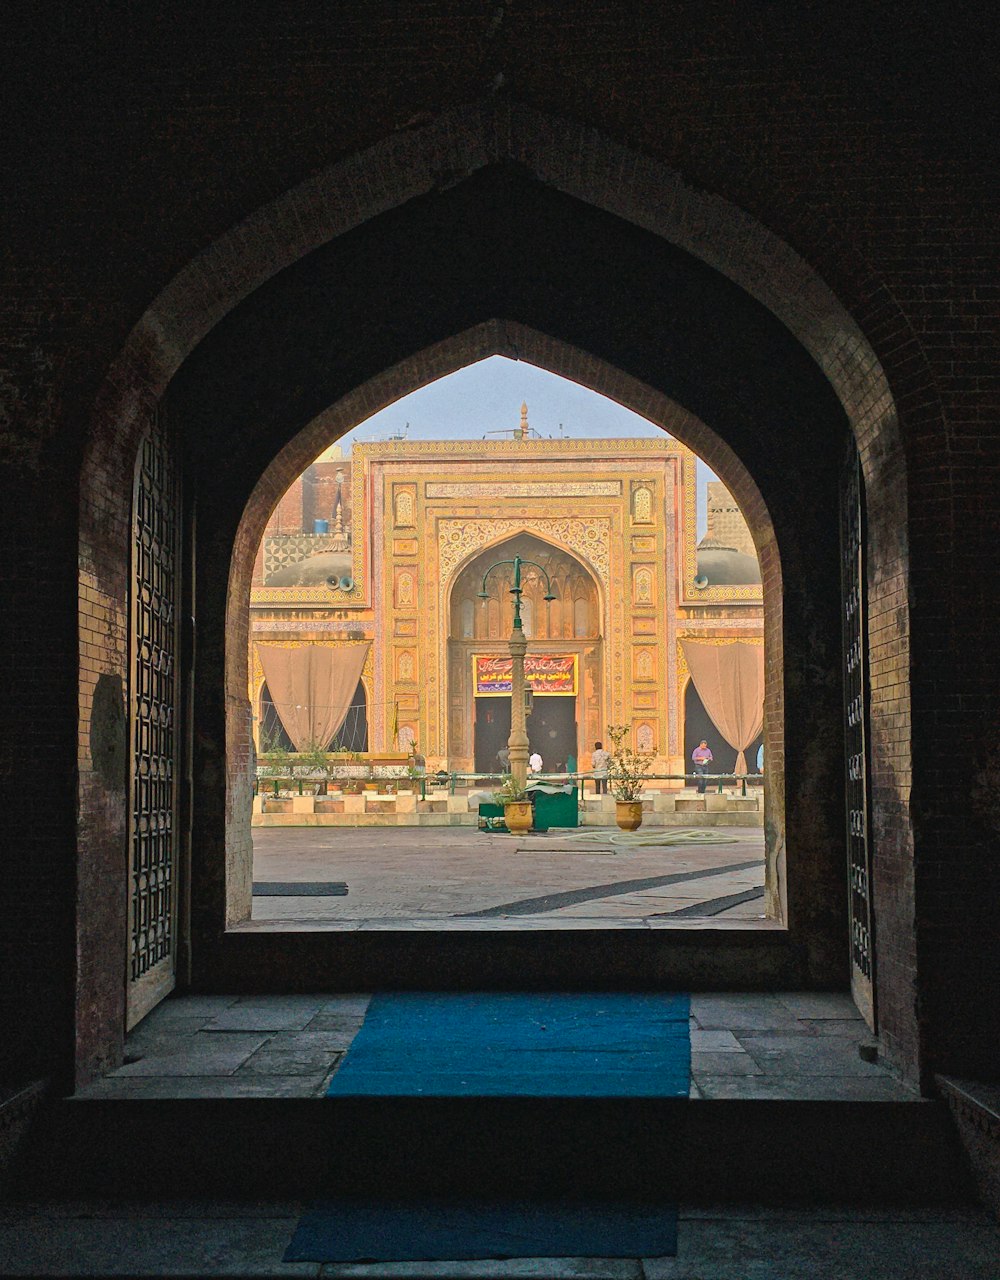 a view of a building through an archway